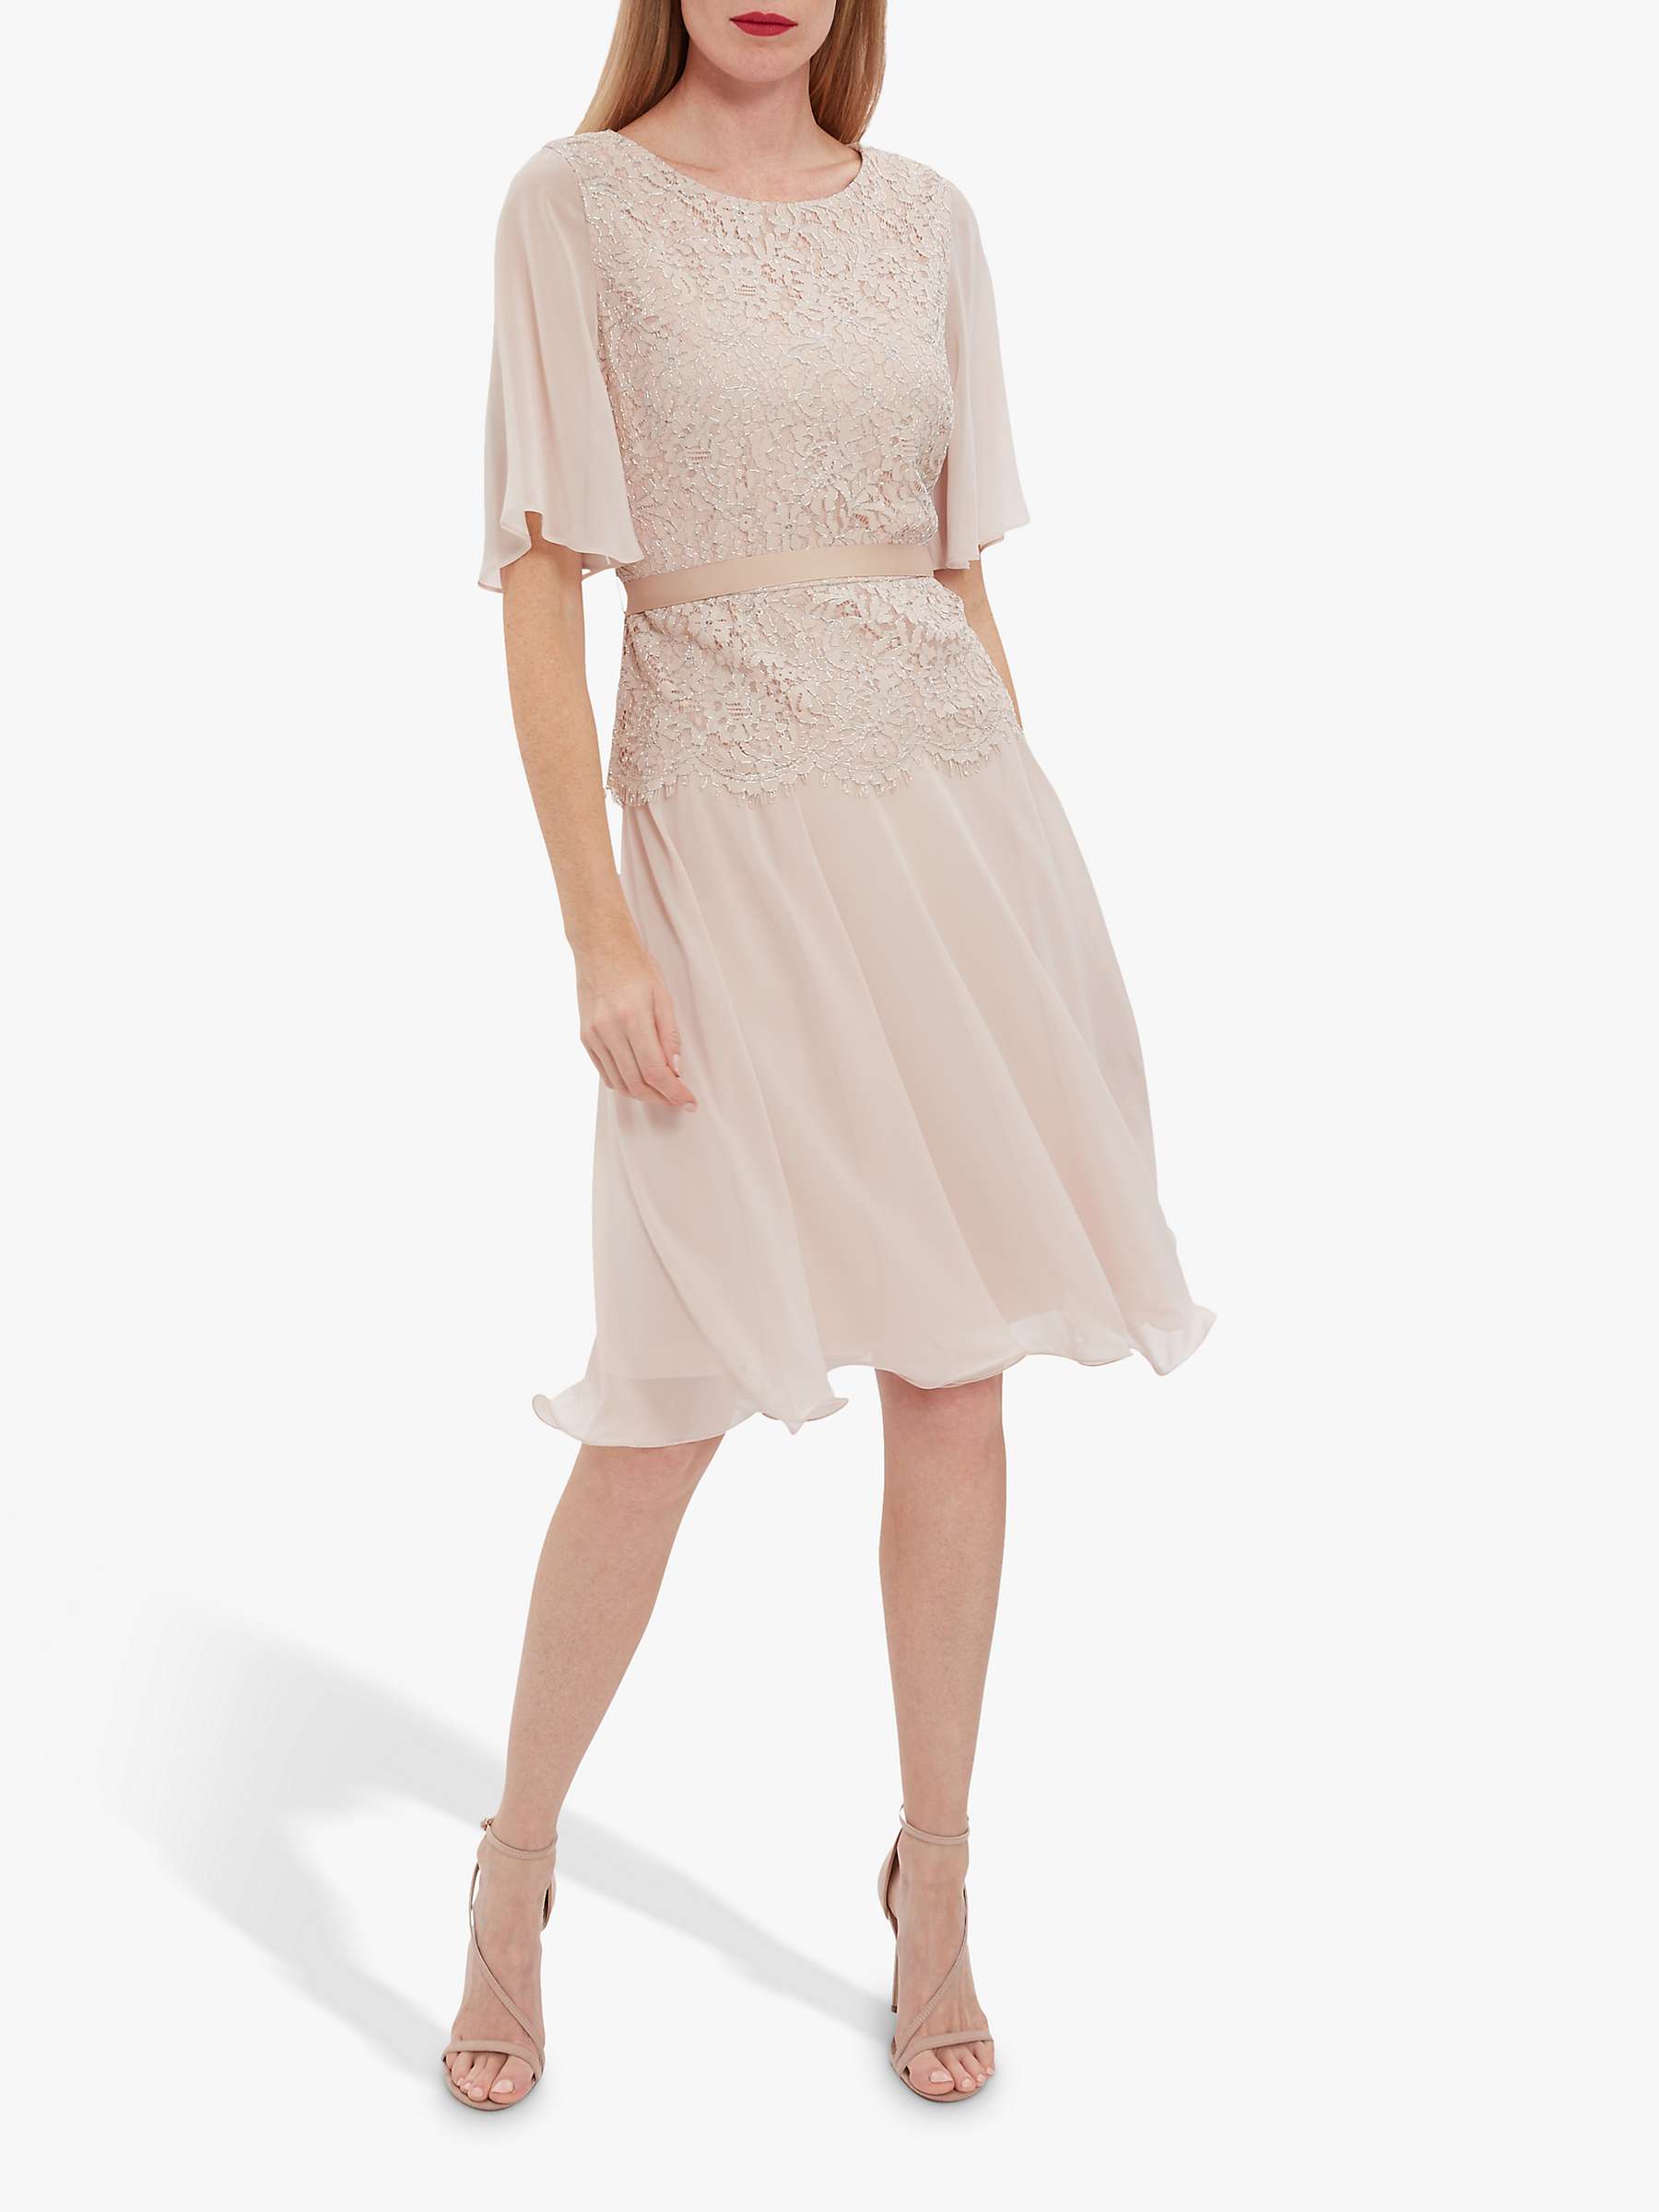 Buy Gina Bacconi Frederica Lace Dress Online at johnlewis.com